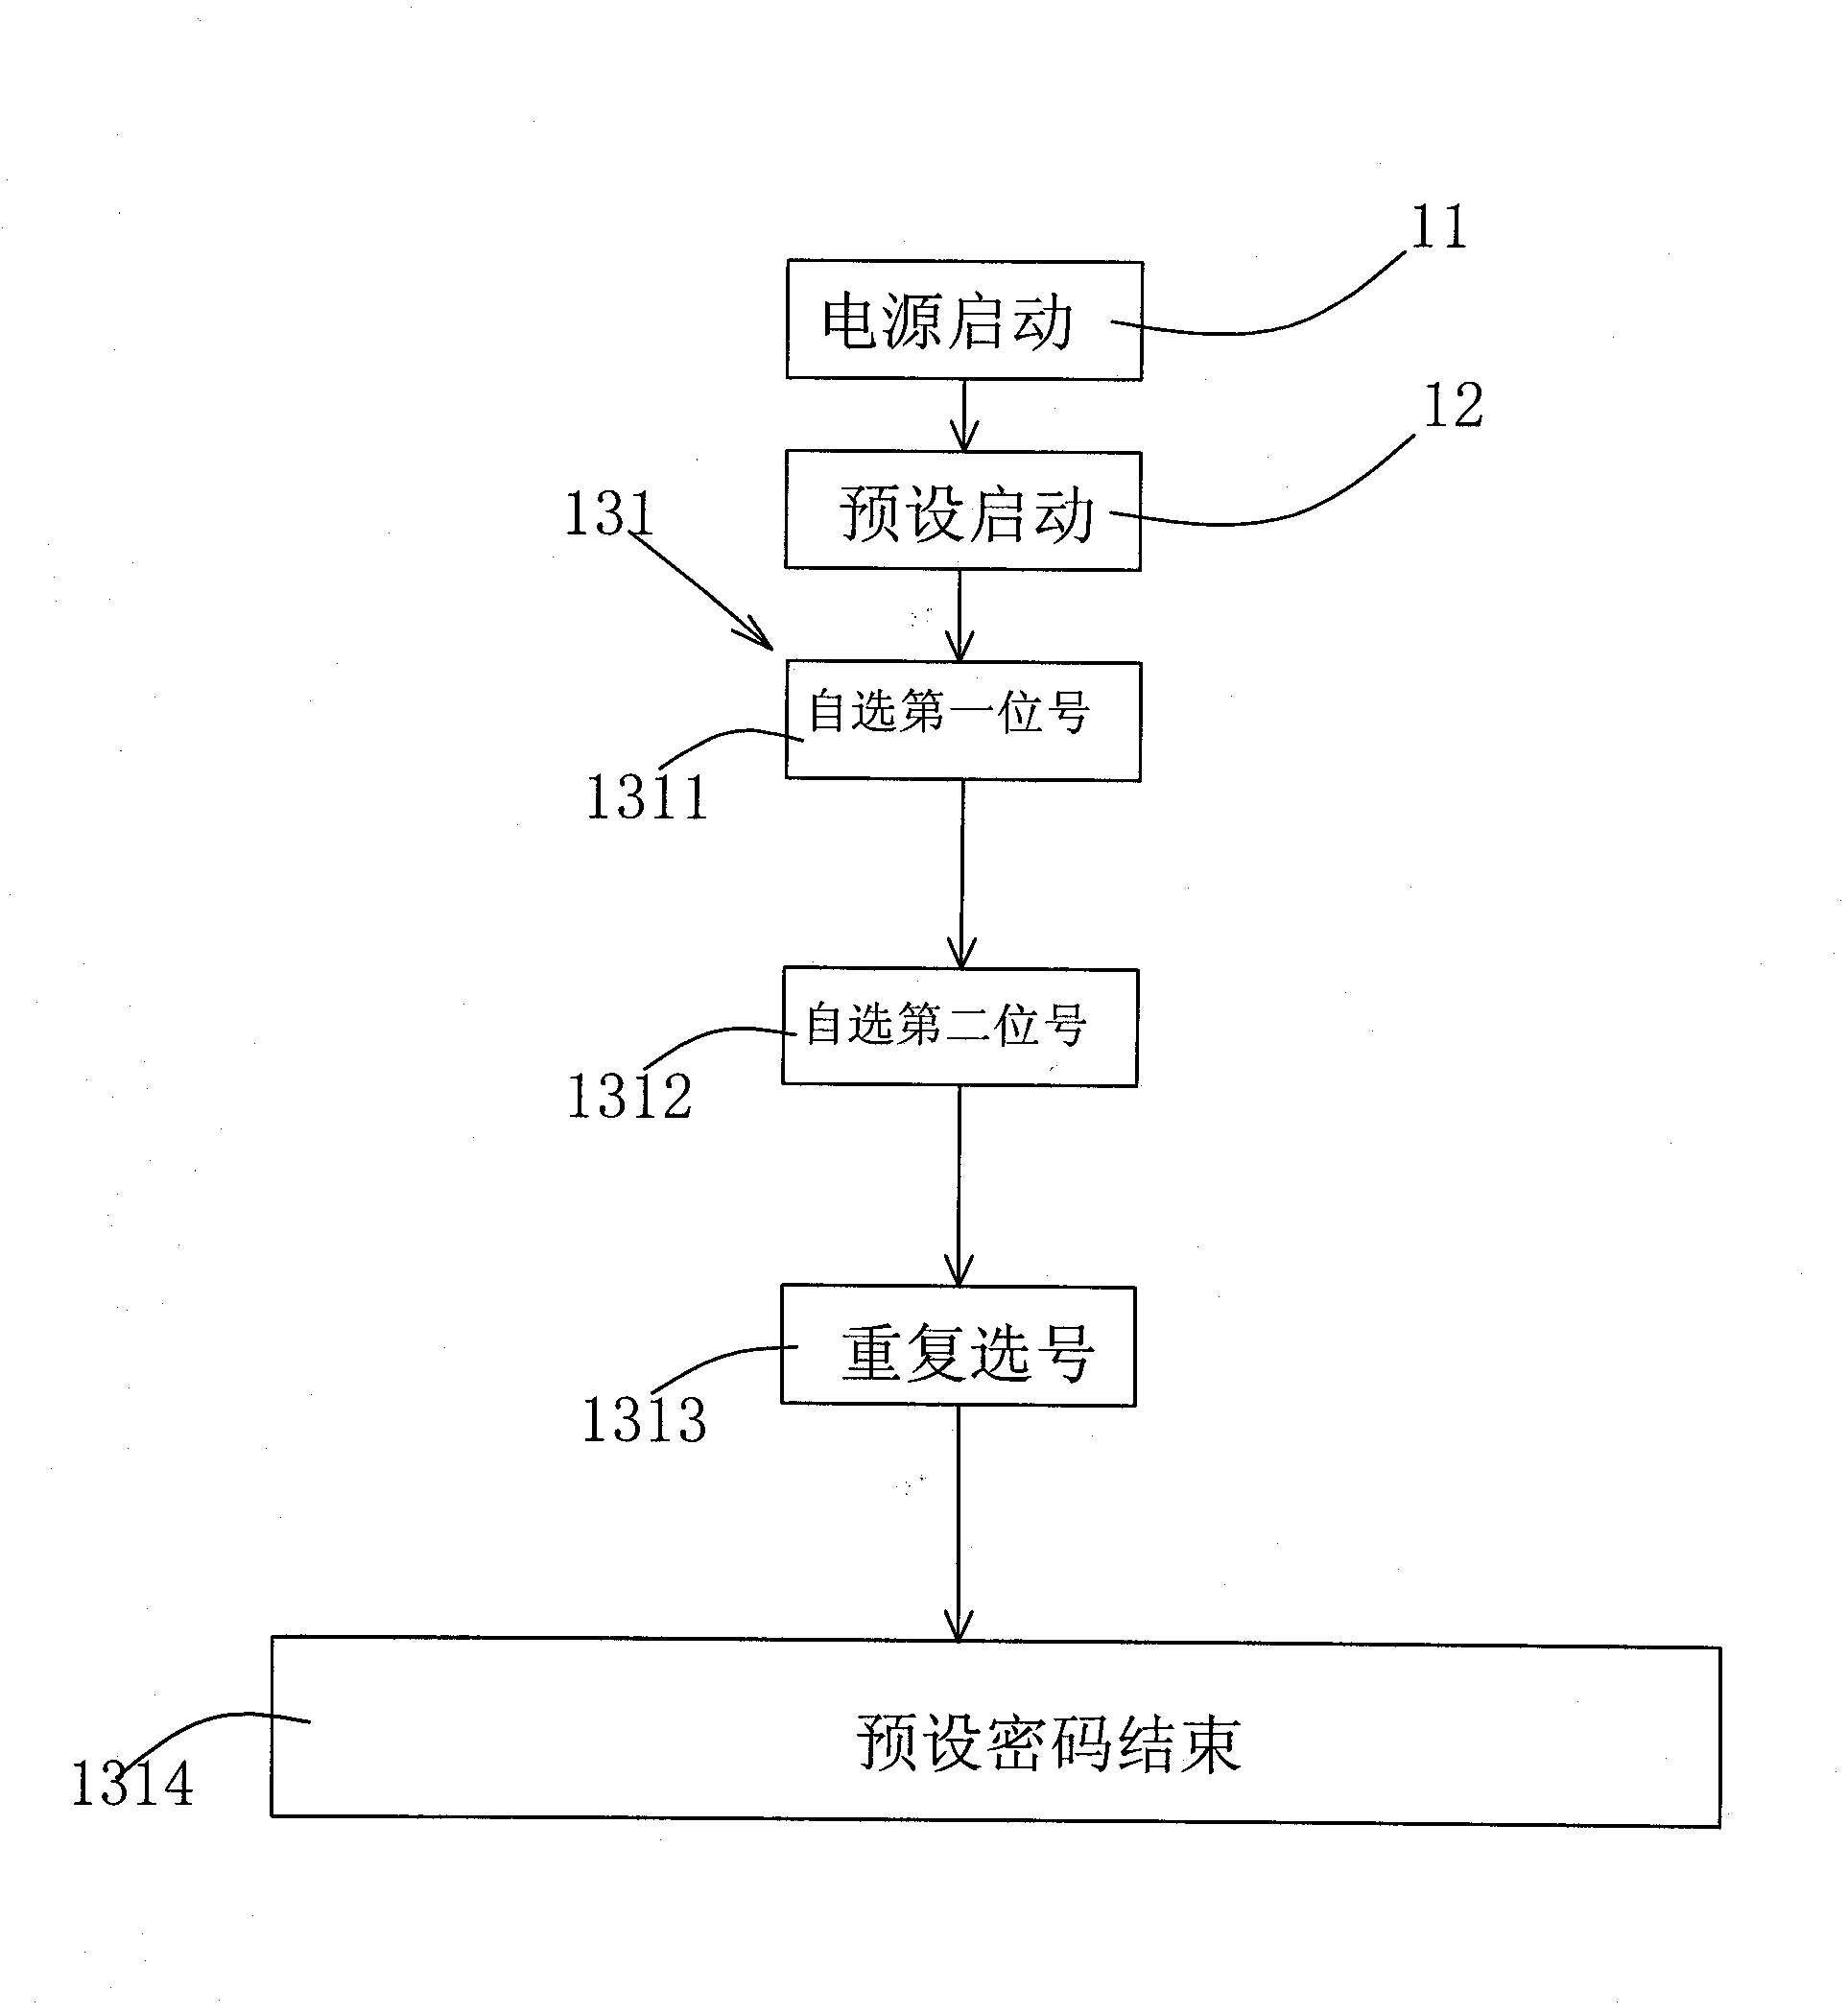 Method for inputting or presetting passwords for display screen information secrecy product by using one key, and application